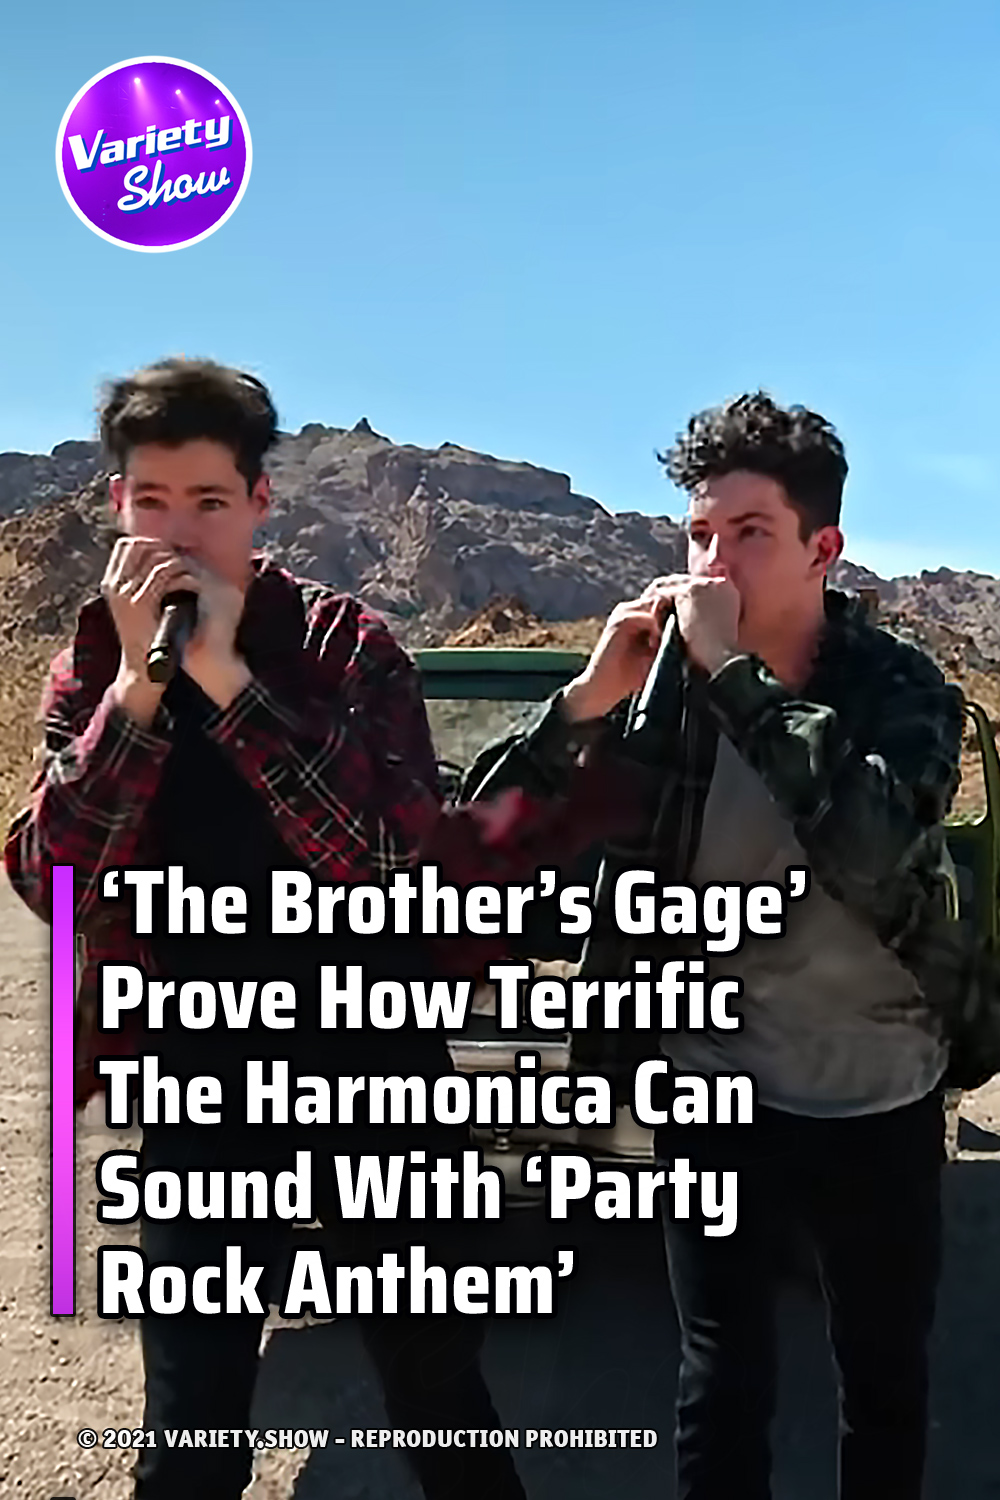 ‘The Brother’s Gage’ Prove How Terrific The Harmonica Can Sound With ‘Party Rock Anthem’